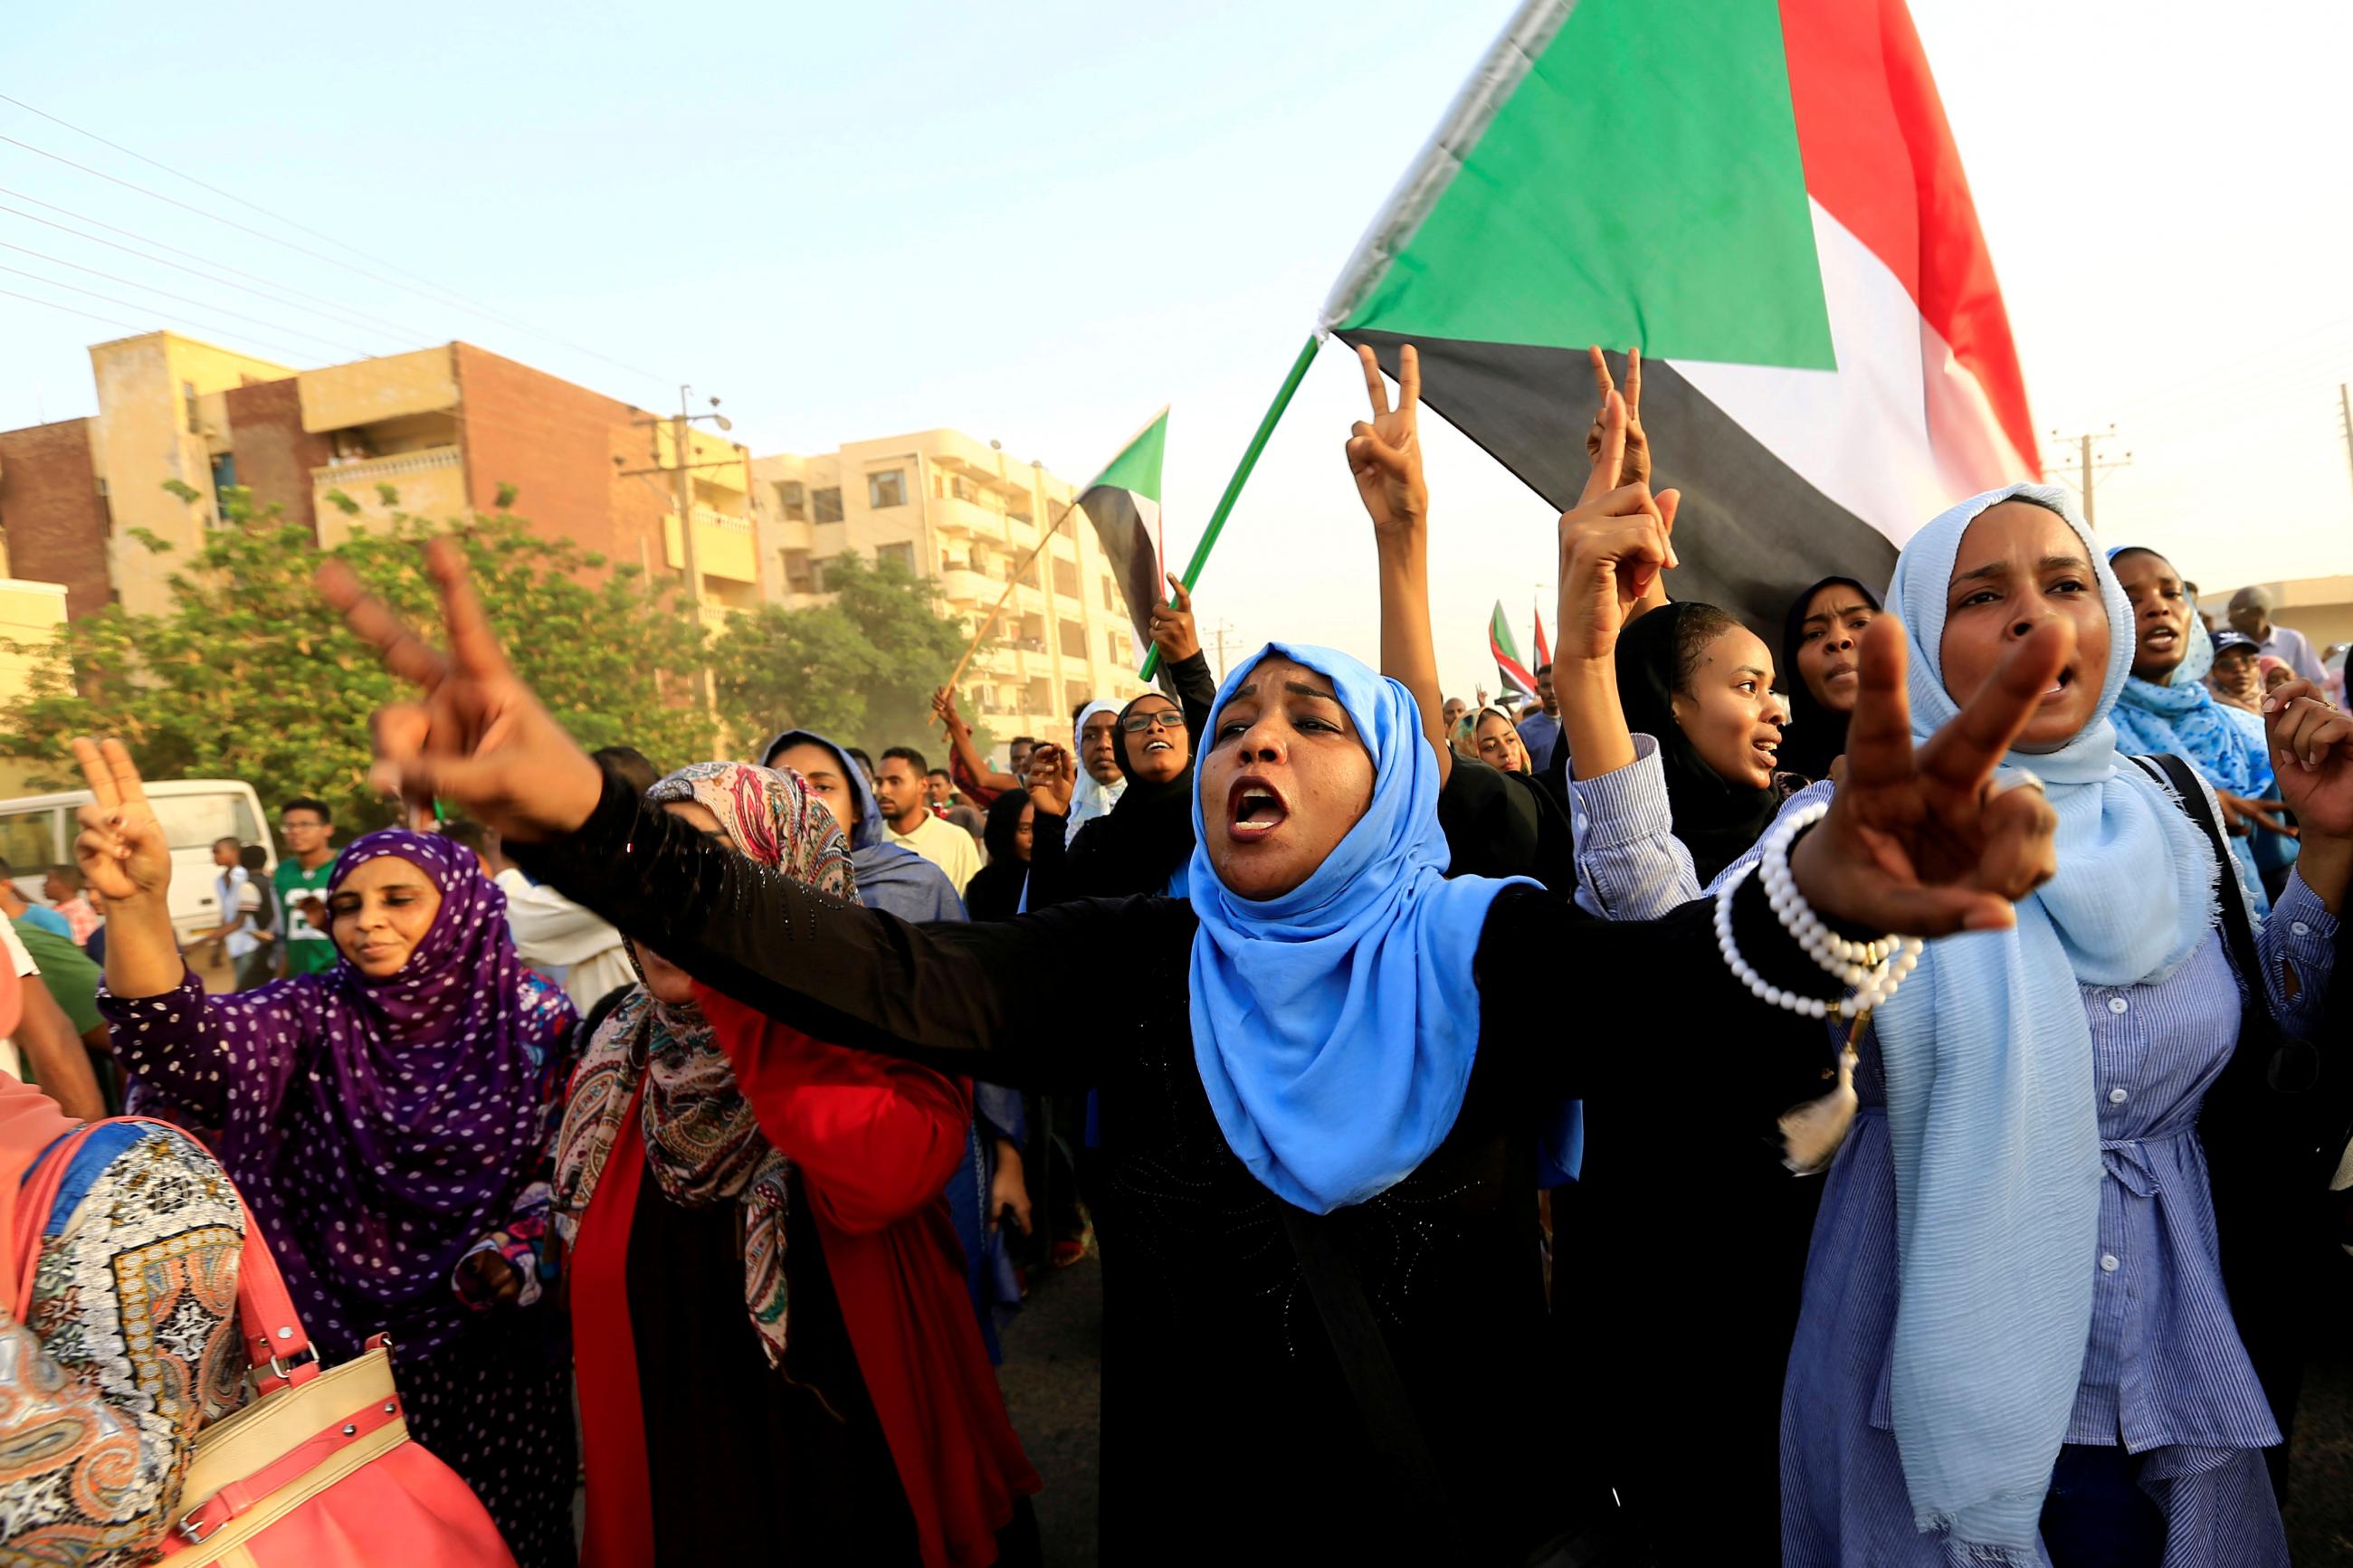 Protesters march during a demonstration to commemorate 40 days since the sit-in massacre in Khartoum, Sudan. Photo taken July 13, 2019.